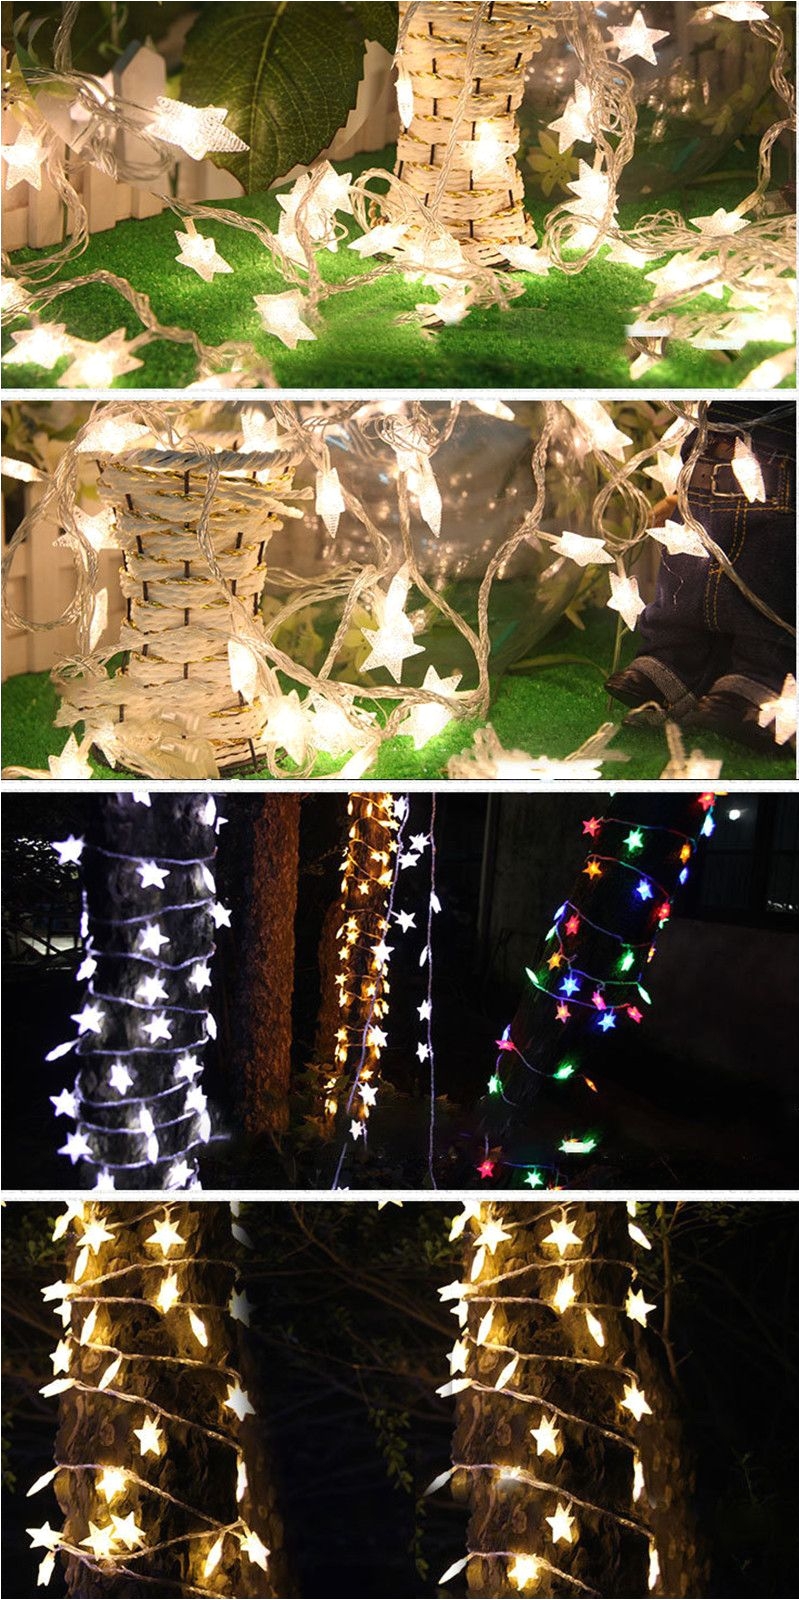 how to hang patio string lights commercial grade string lights are ideal for permanent installation